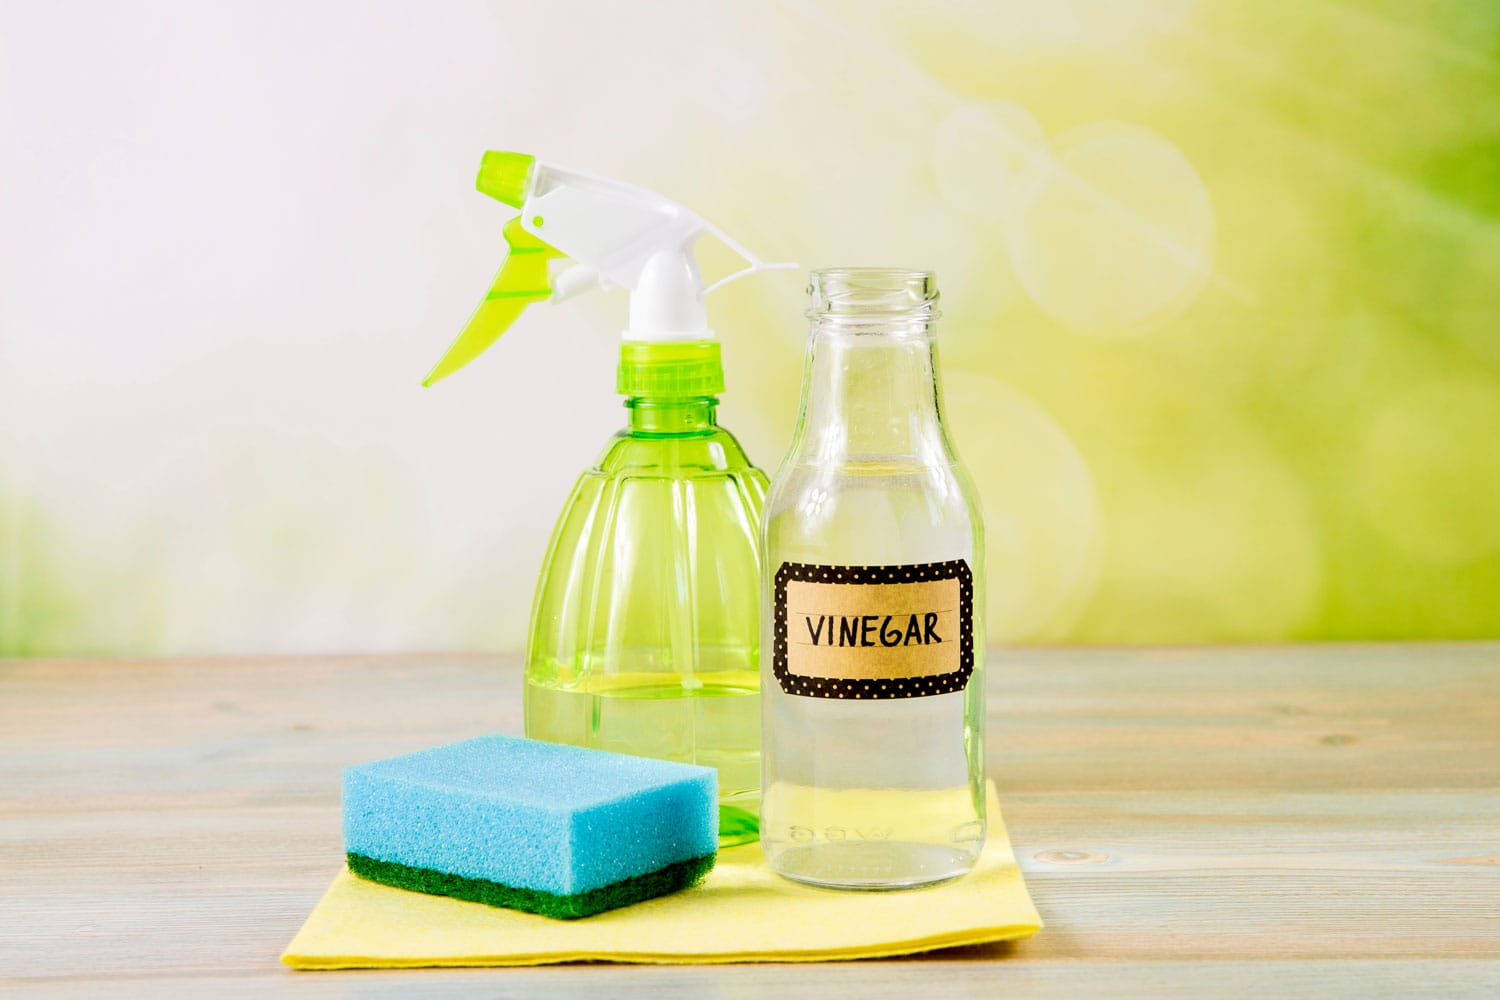 Chemical free home cleaner products concept. Using natural destilled white vinegar in spray bottle to remove stains.